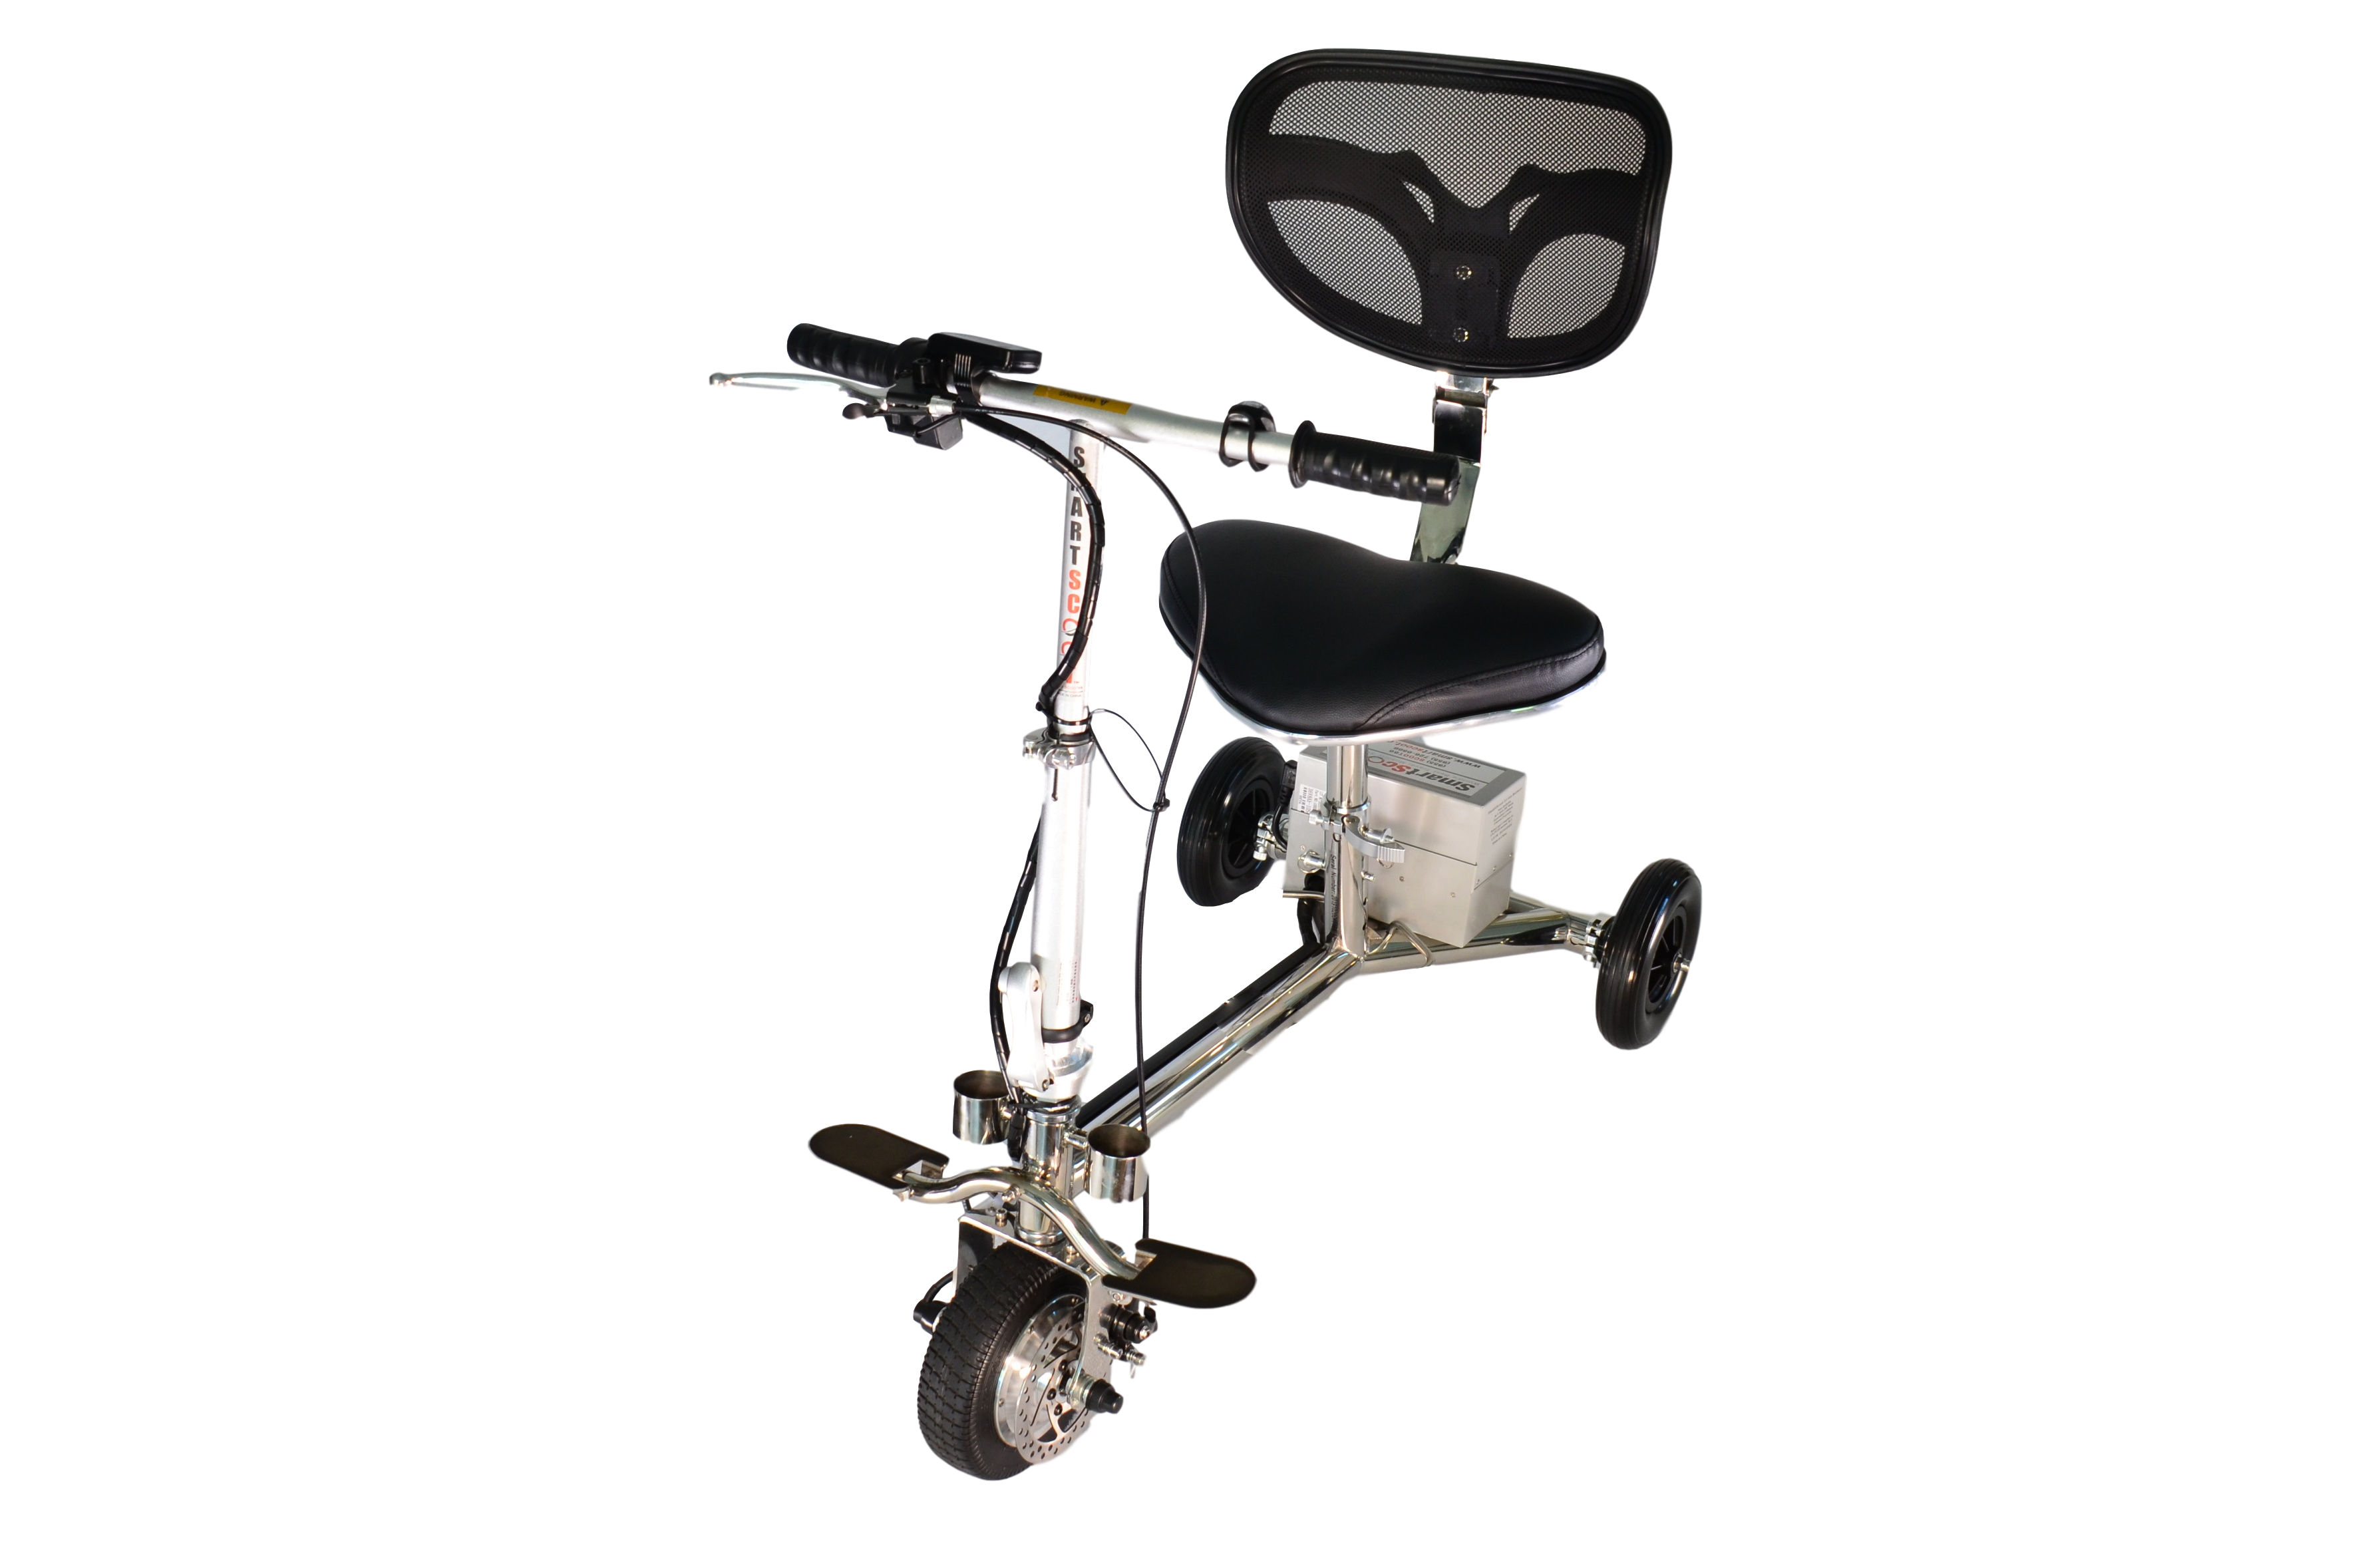 3WHEEL SCOOTER Travel Mobility Scooter By SmartScoot - PureUps